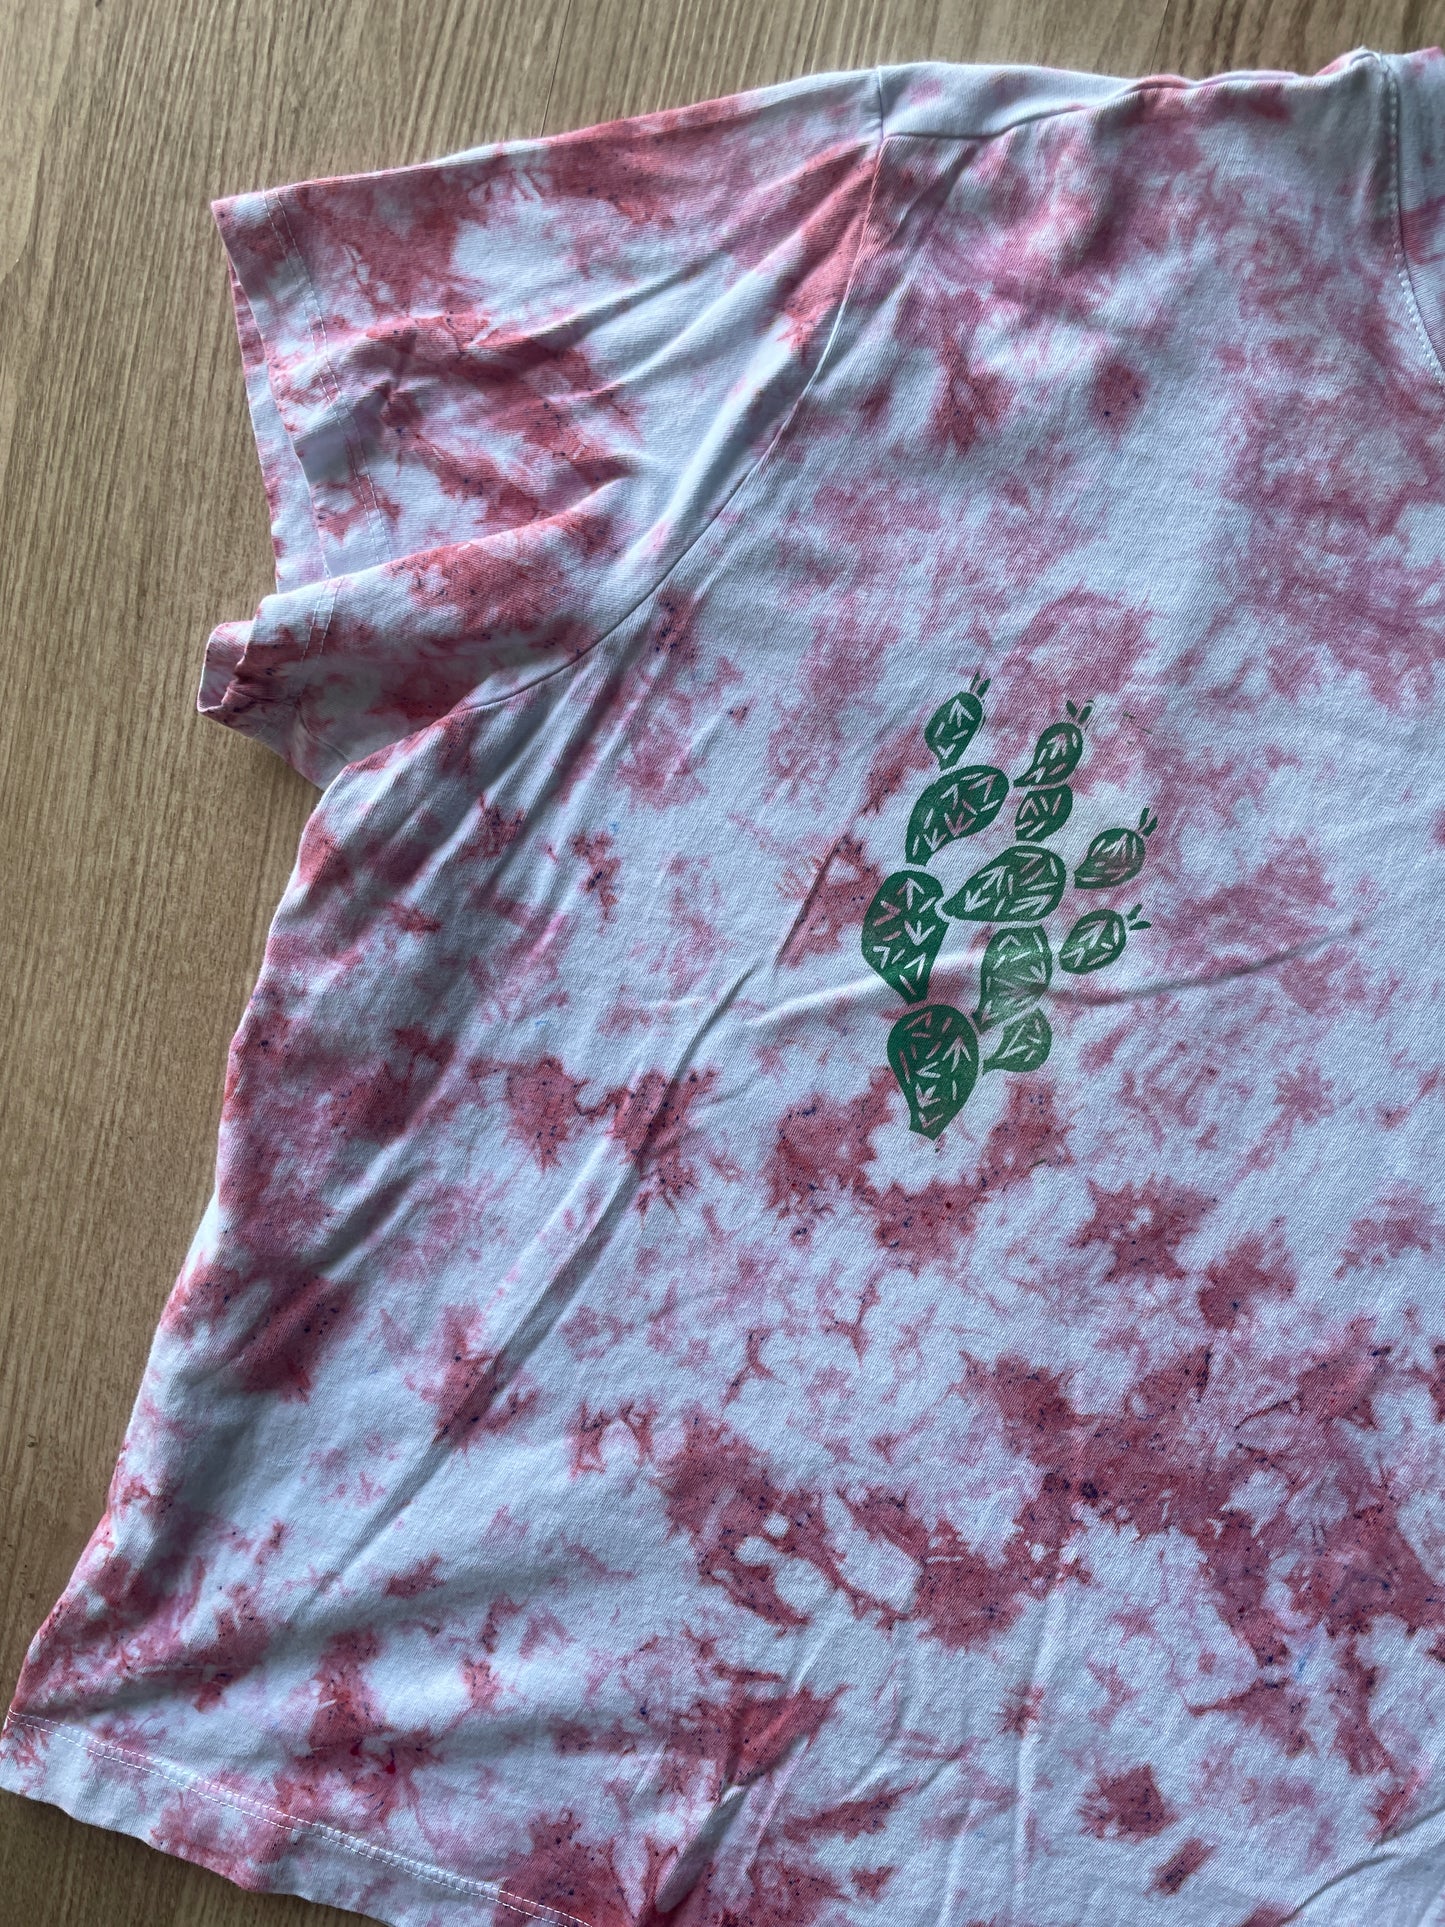 XL Women’s Prickly Pear Cactus Tie Dye T-Shirt | One-Of-a-Kind Pastel Pink and White Crumpled Short Sleeve